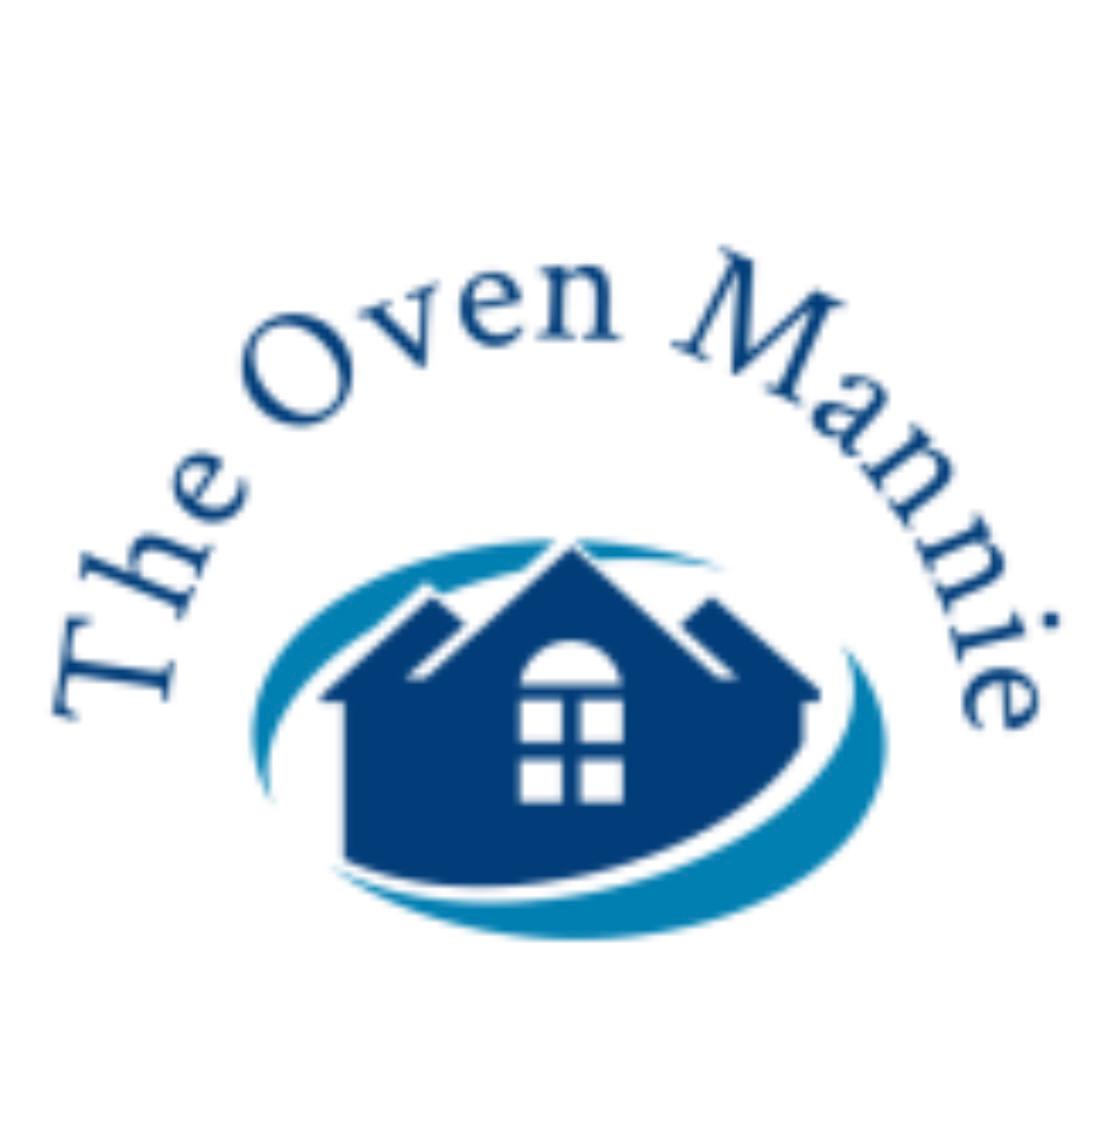 The Oven Mannie and Specialist Cleaning